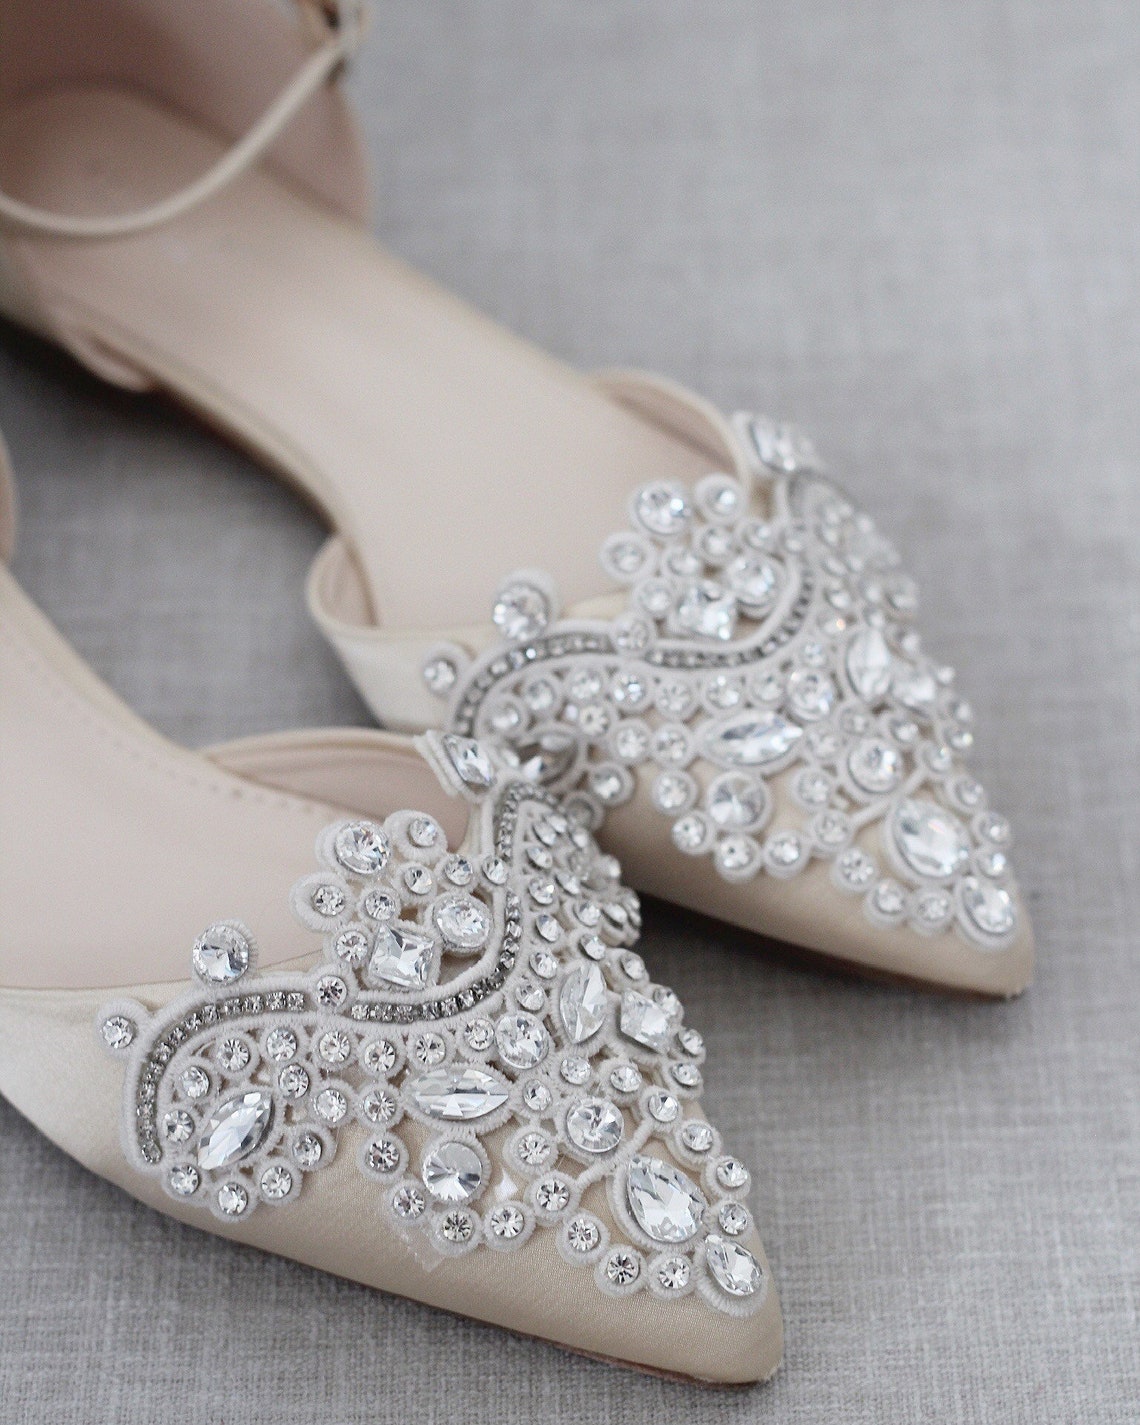 Champagne Satin Pointy Toe Flats With Sparkly OVERSIZED - Etsy